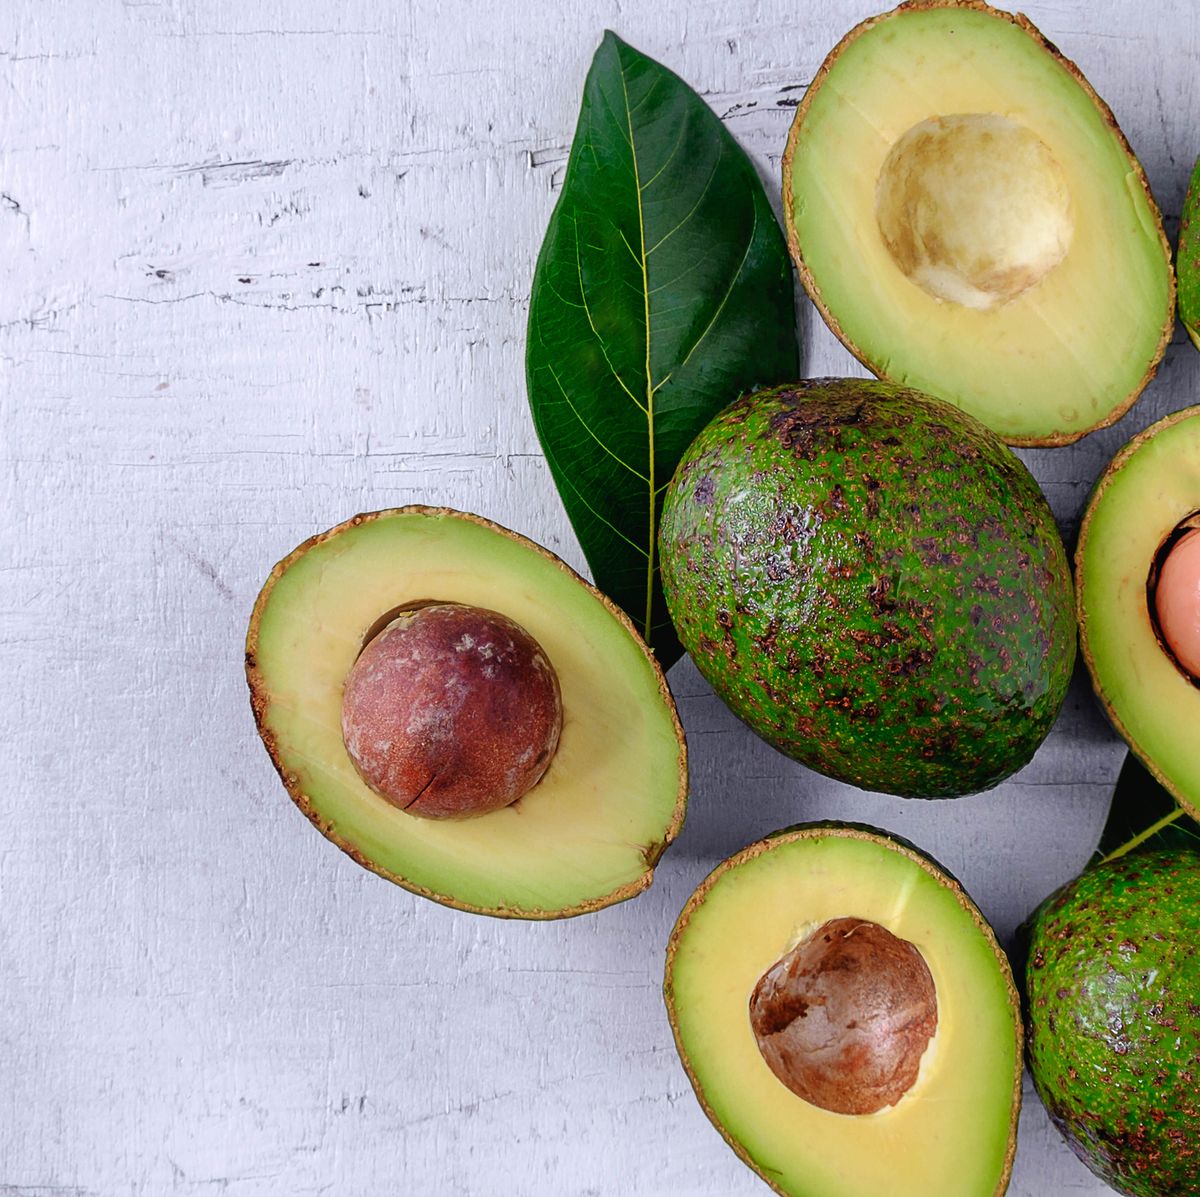 How to keep avocado fresh and green